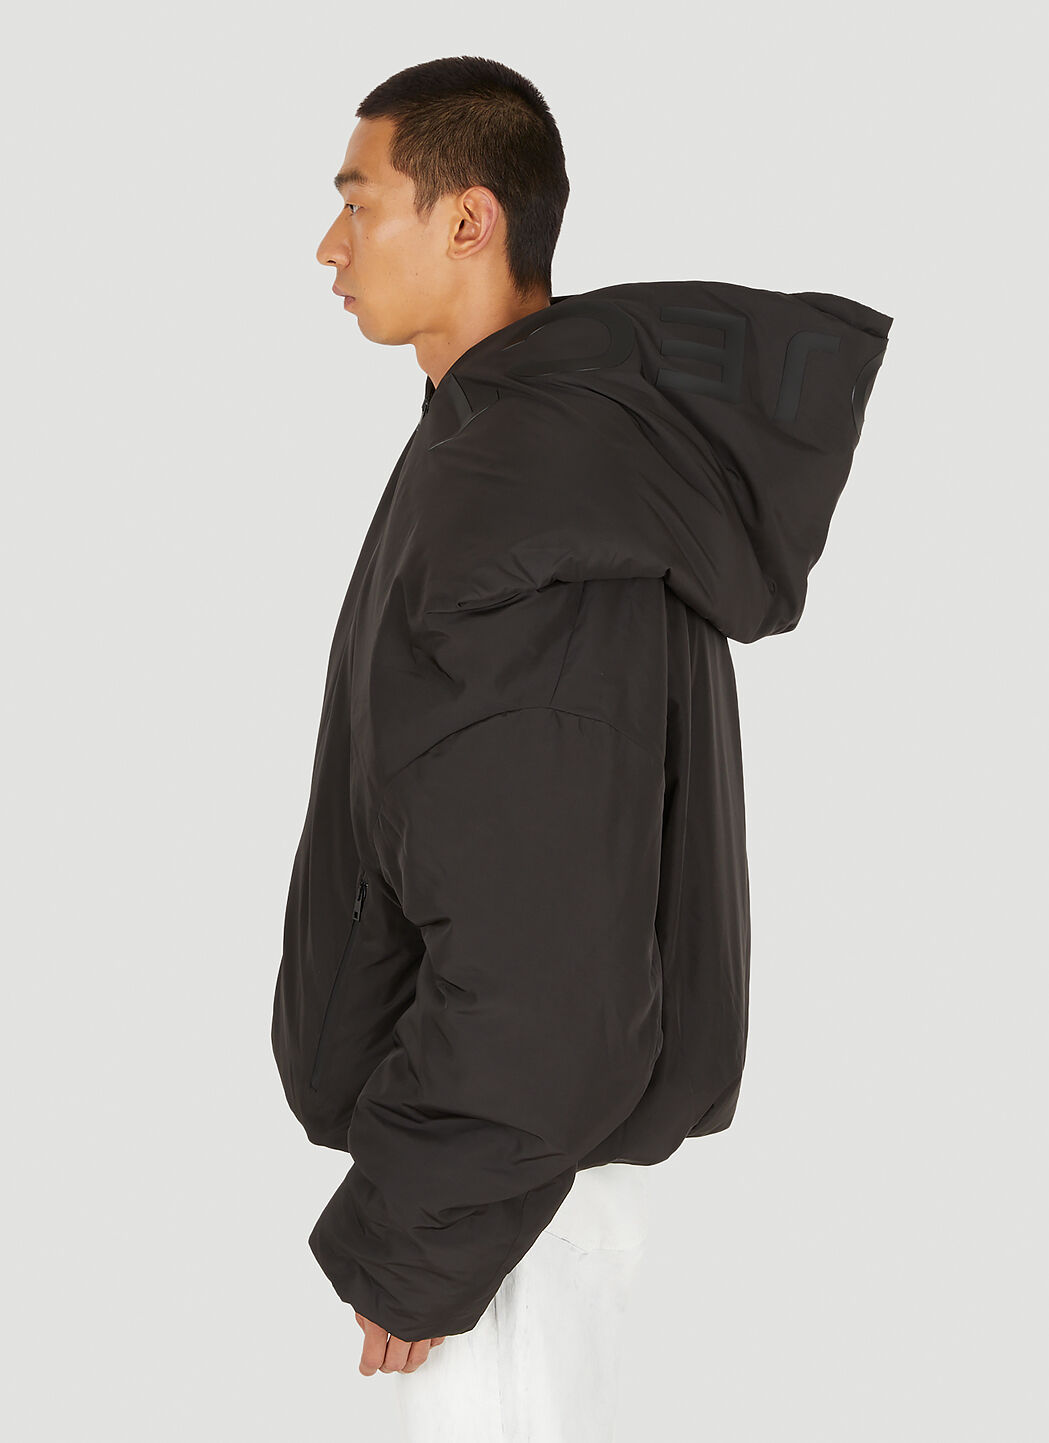 Y/Project Monster Puffer Jacket in Black | LN-CC®